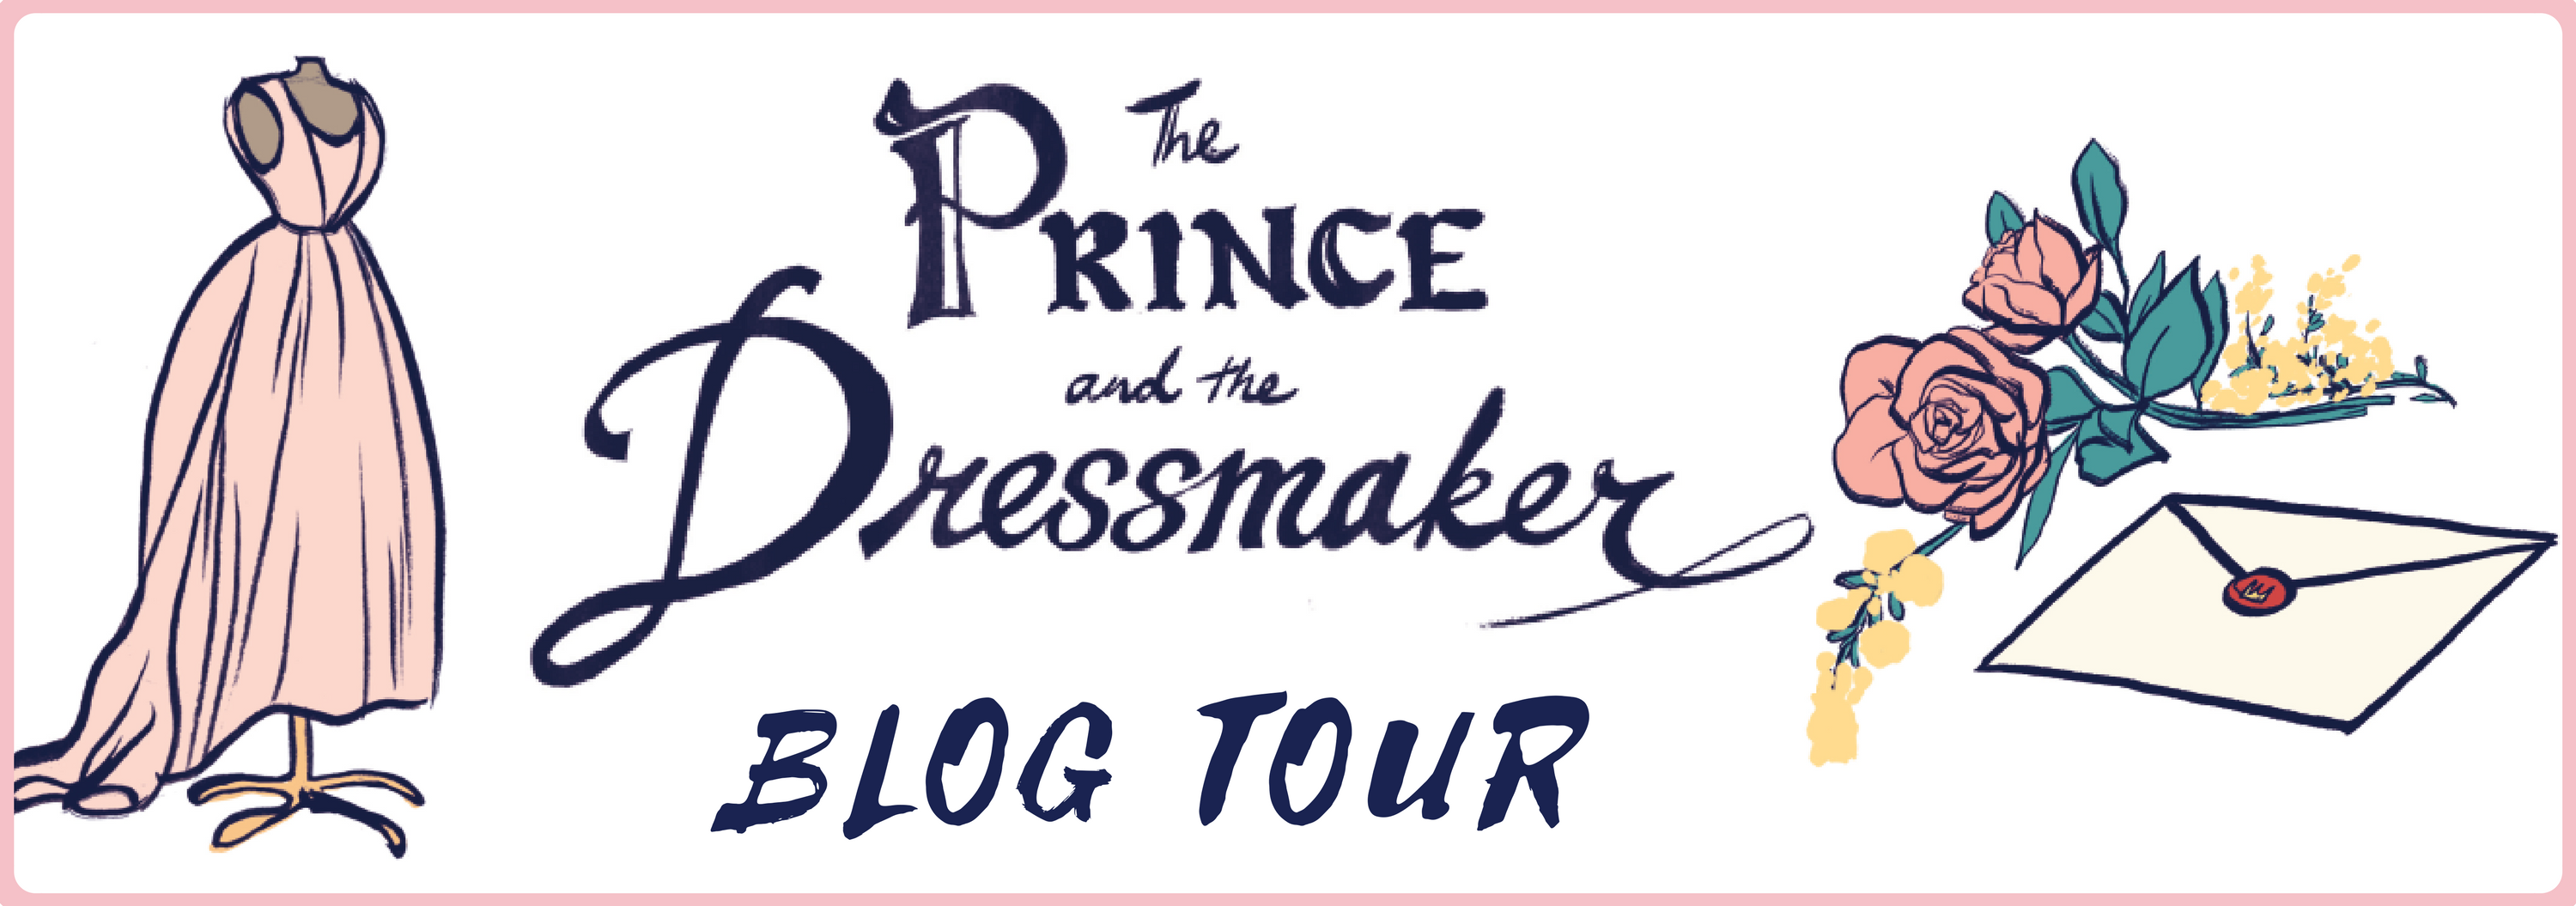 Blog Tour: The Prince And The Dressmaker